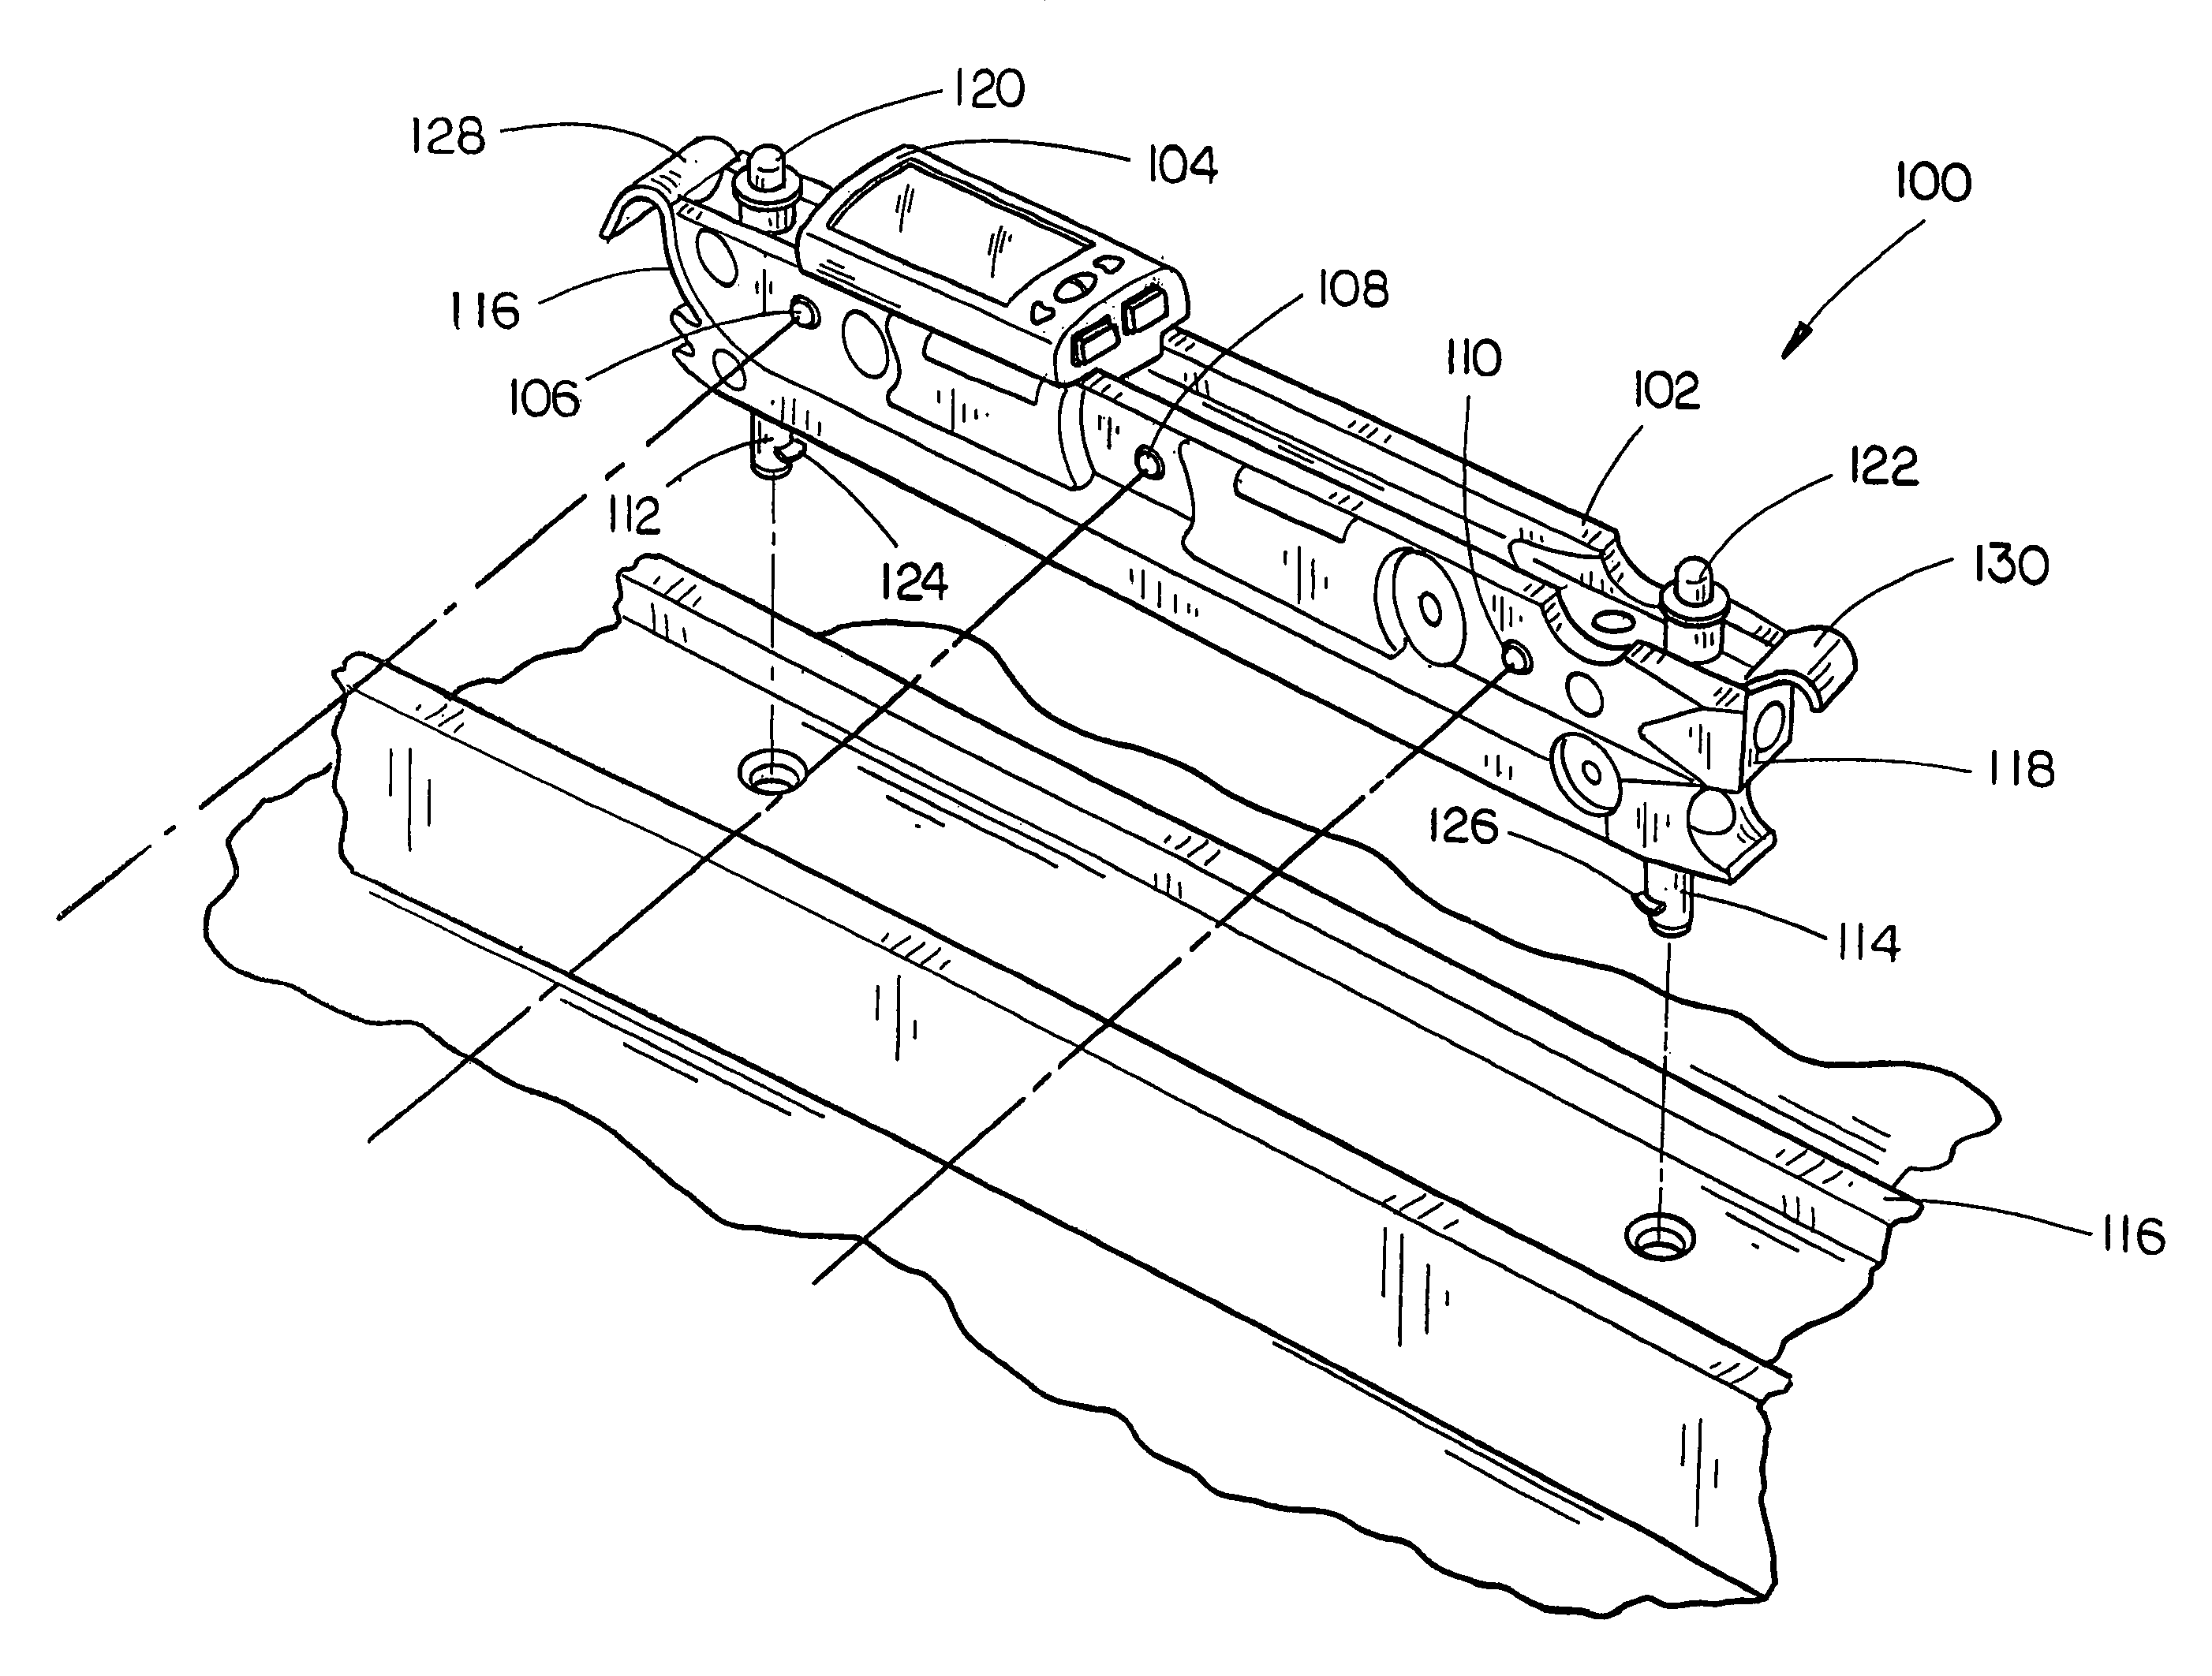 Measurement and alignment device including a display system